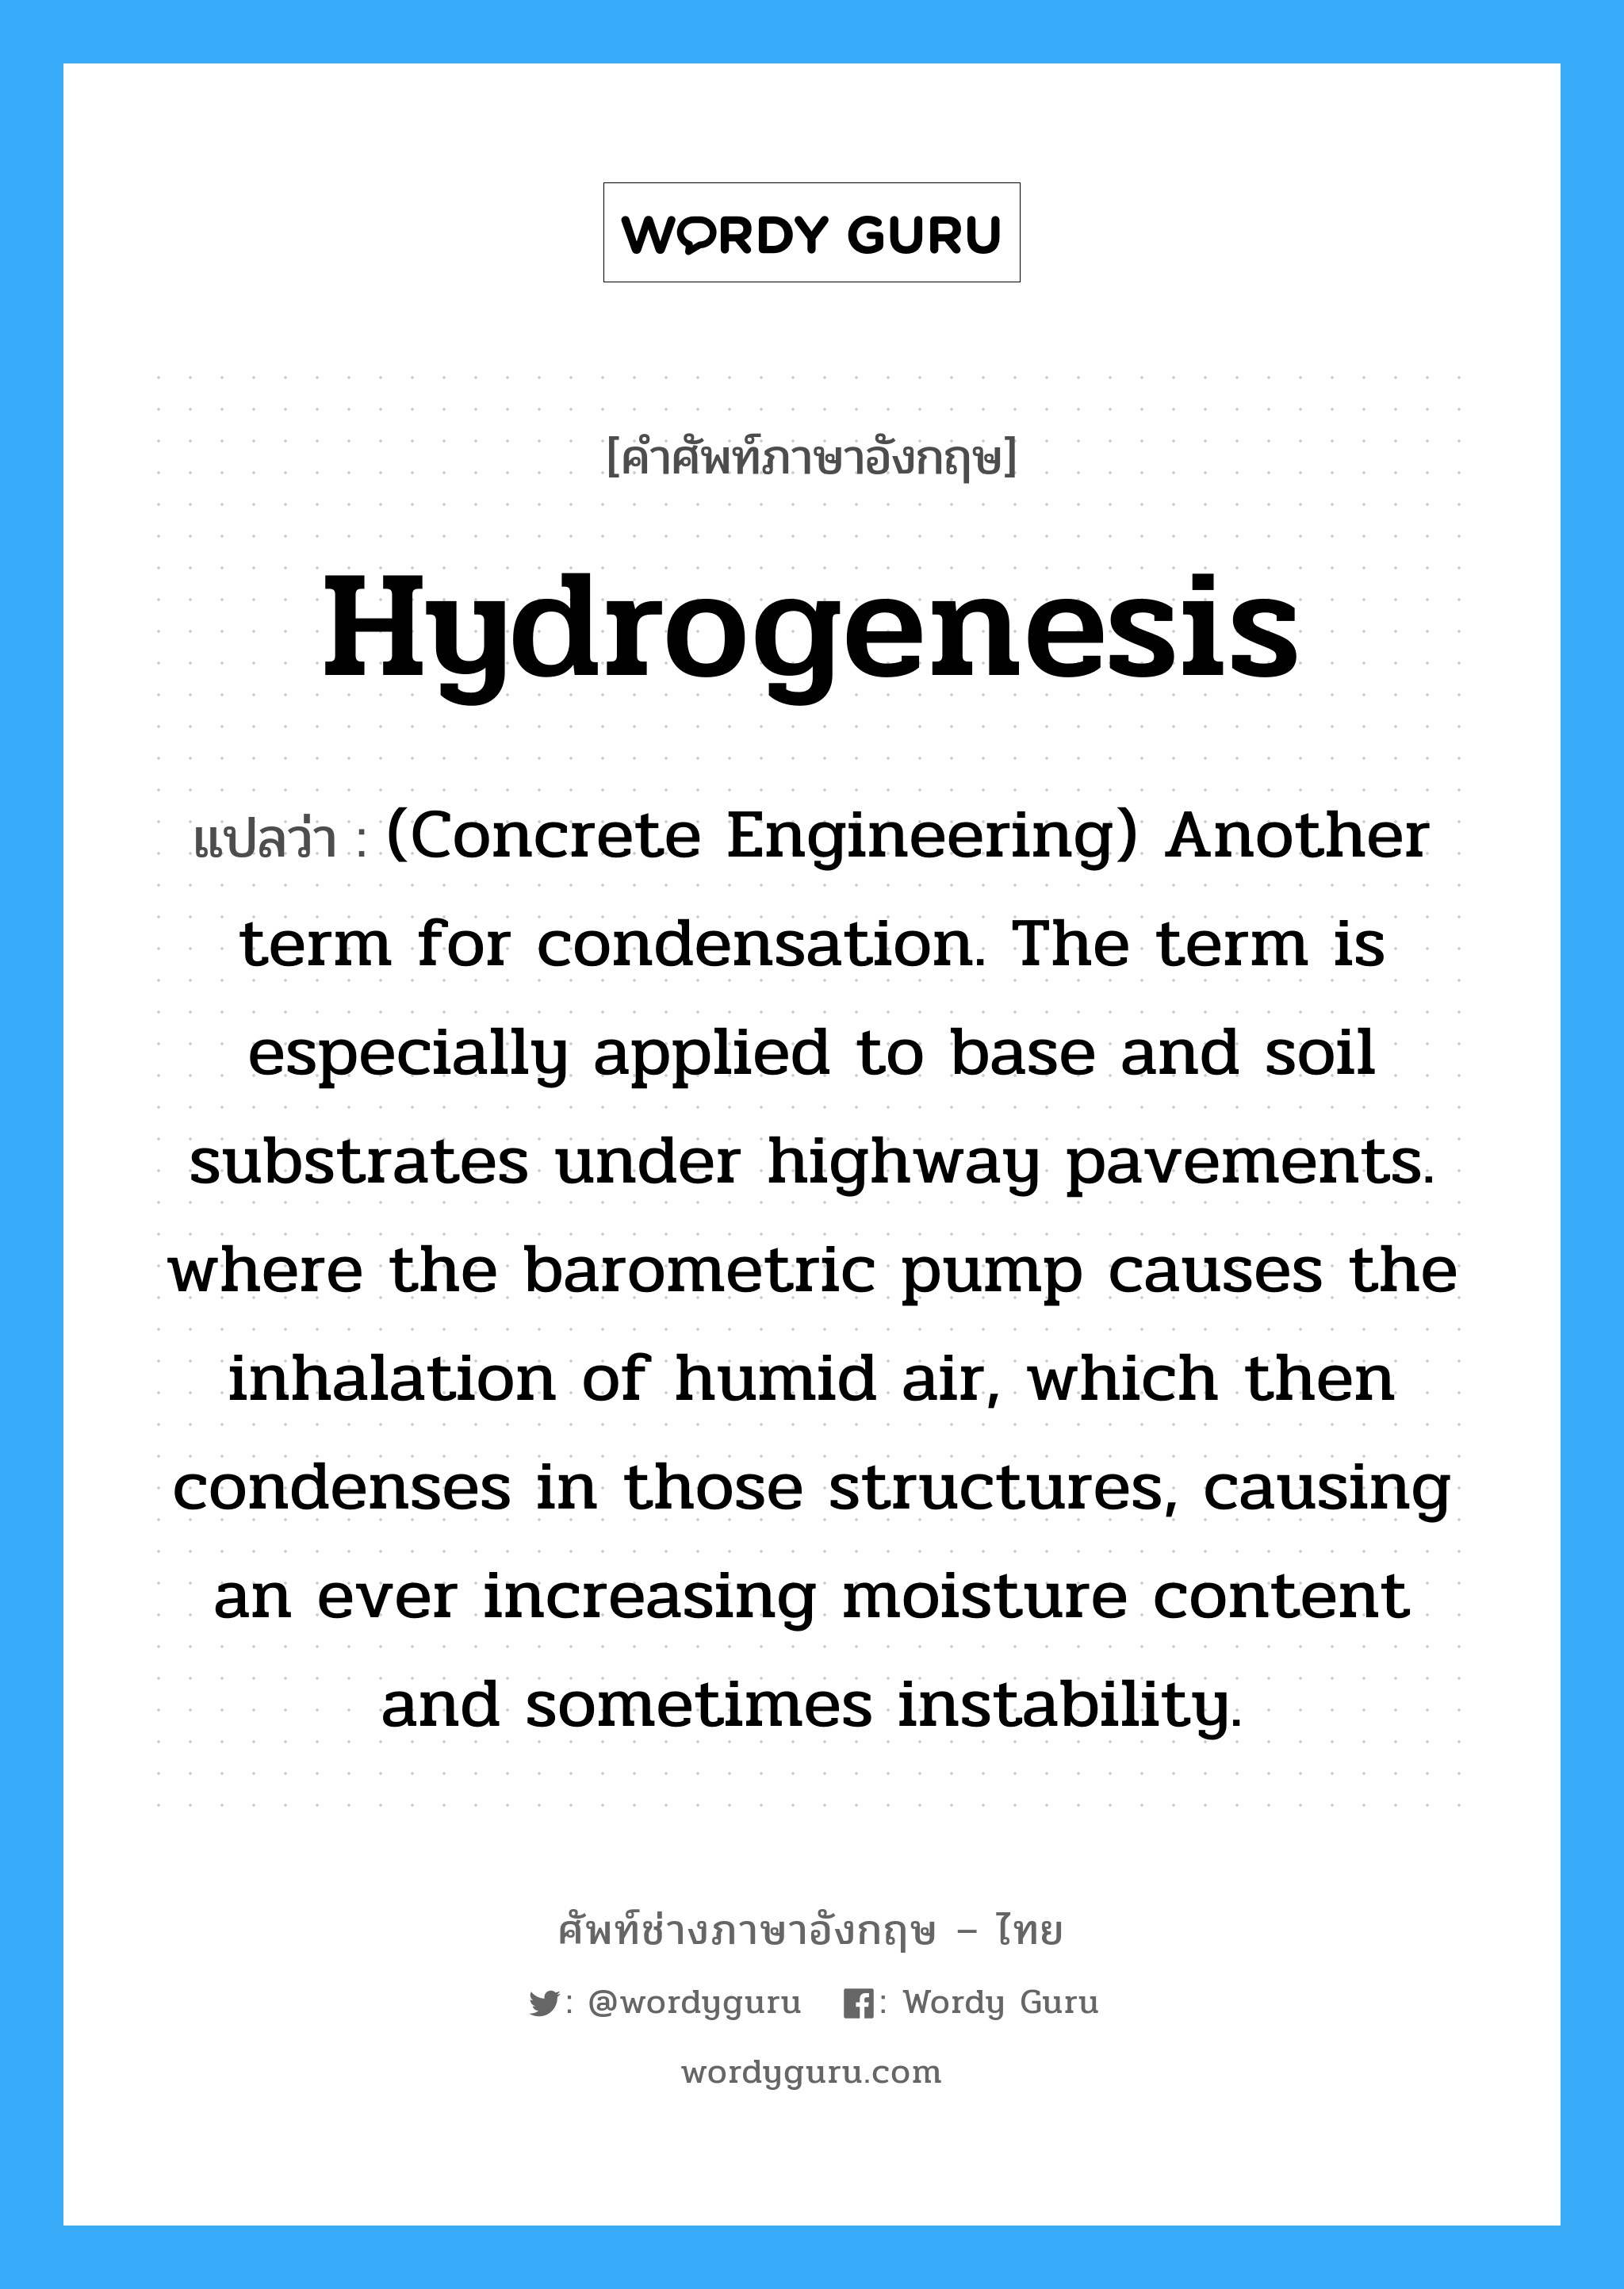 Hydrogenesis แปลว่า?, คำศัพท์ช่างภาษาอังกฤษ - ไทย Hydrogenesis คำศัพท์ภาษาอังกฤษ Hydrogenesis แปลว่า (Concrete Engineering) Another term for condensation. The term is especially applied to base and soil substrates under highway pavements. where the barometric pump causes the inhalation of humid air, which then condenses in those structures, causing an ever increasing moisture content and sometimes instability.